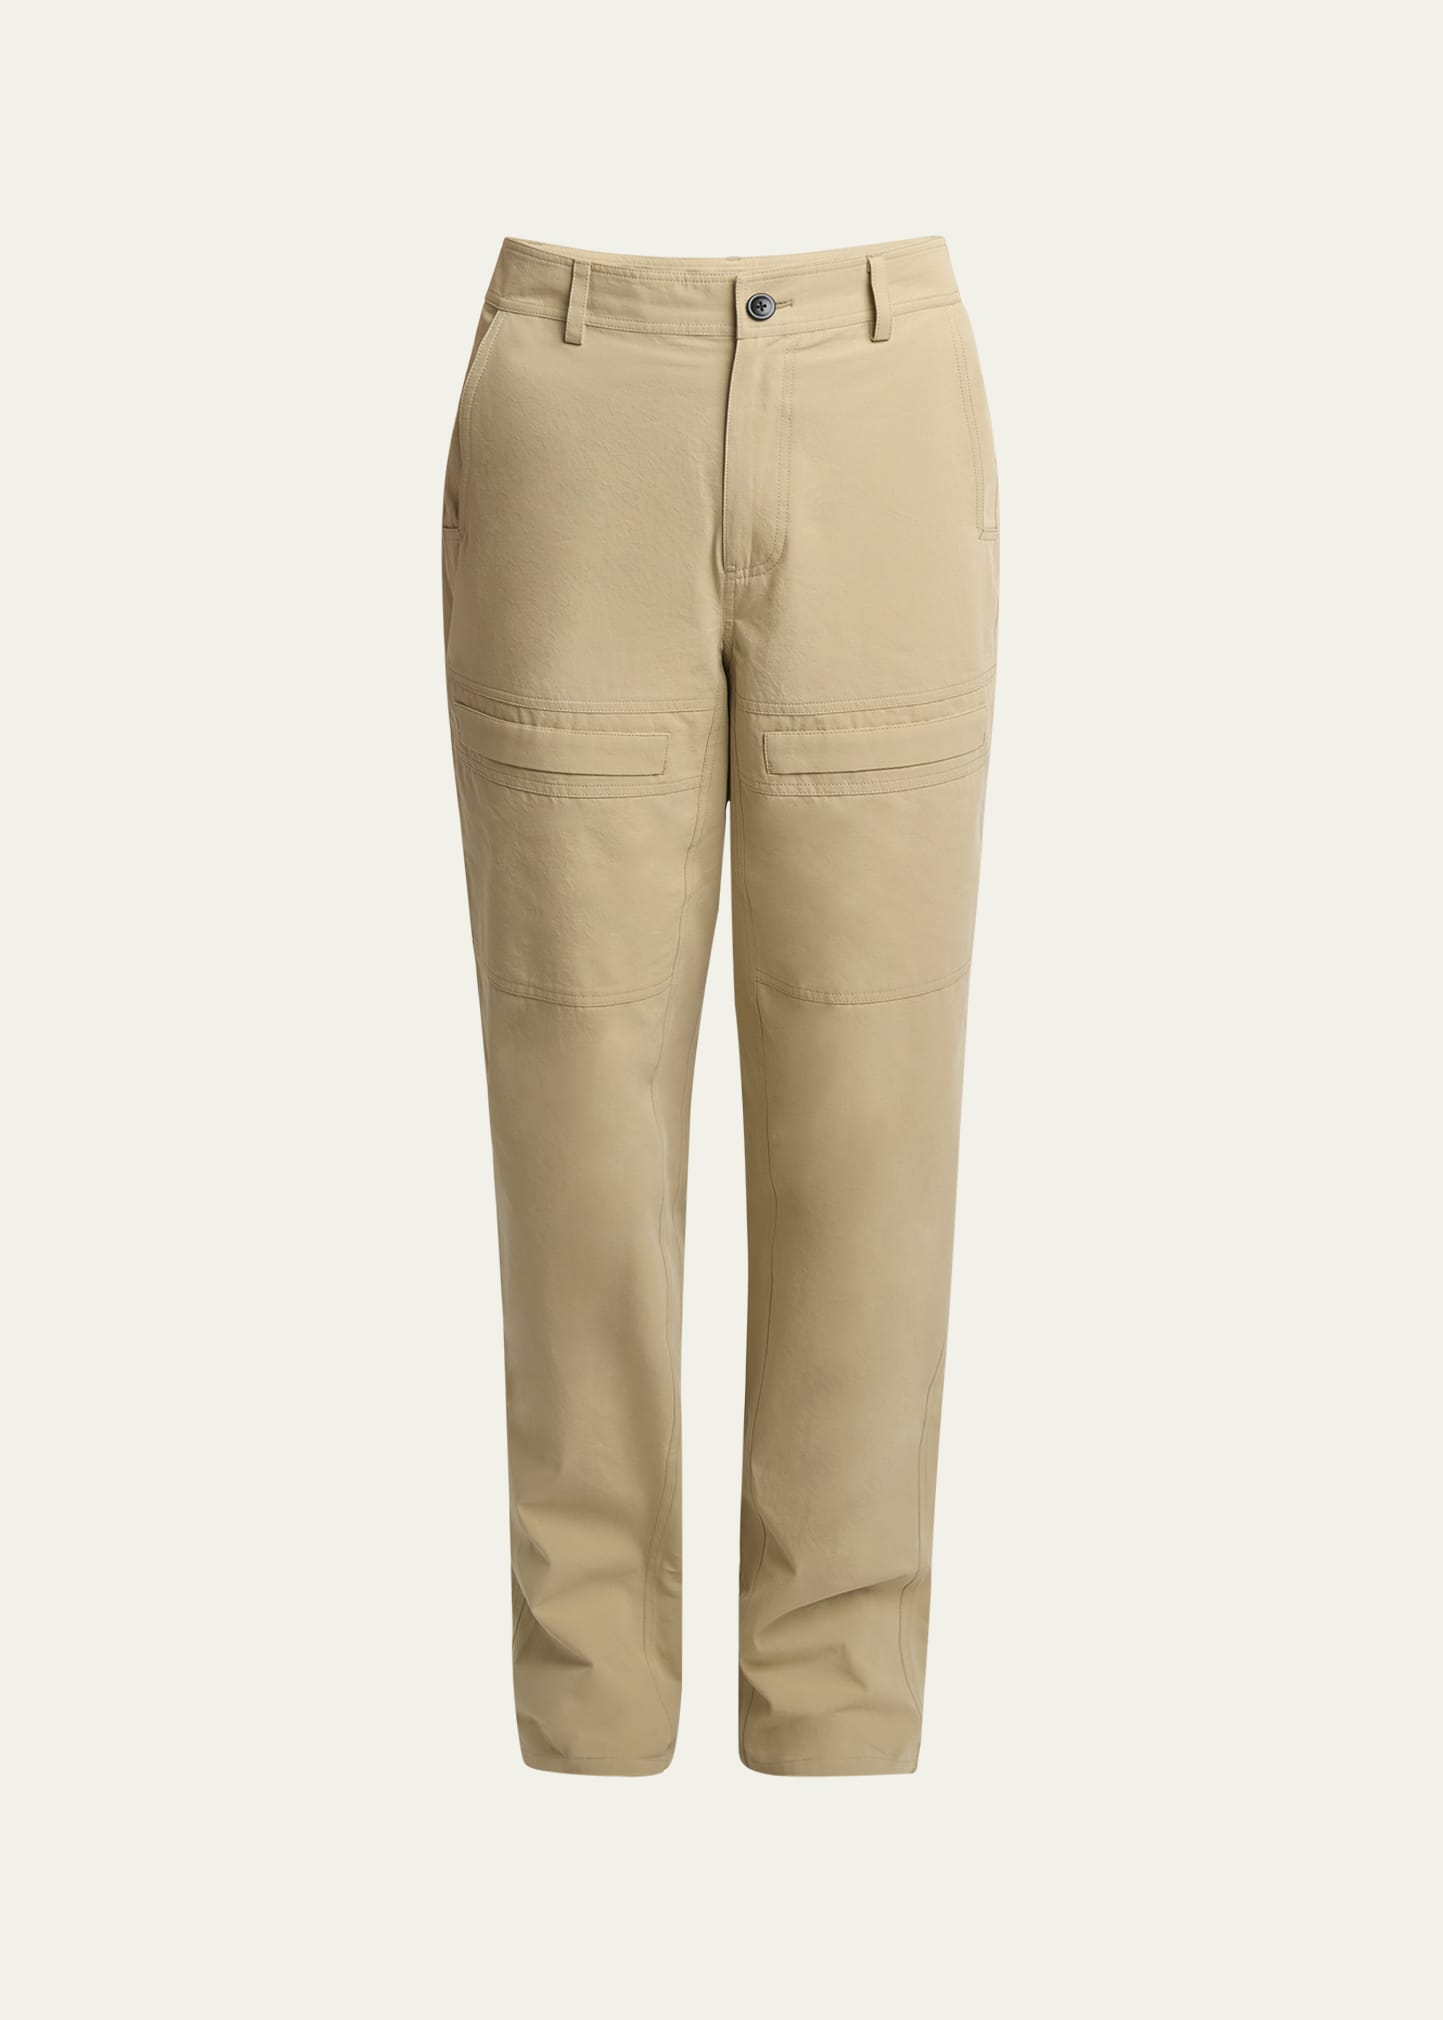 Proenza Schouler White Label Syndor Straight Pants In Brown